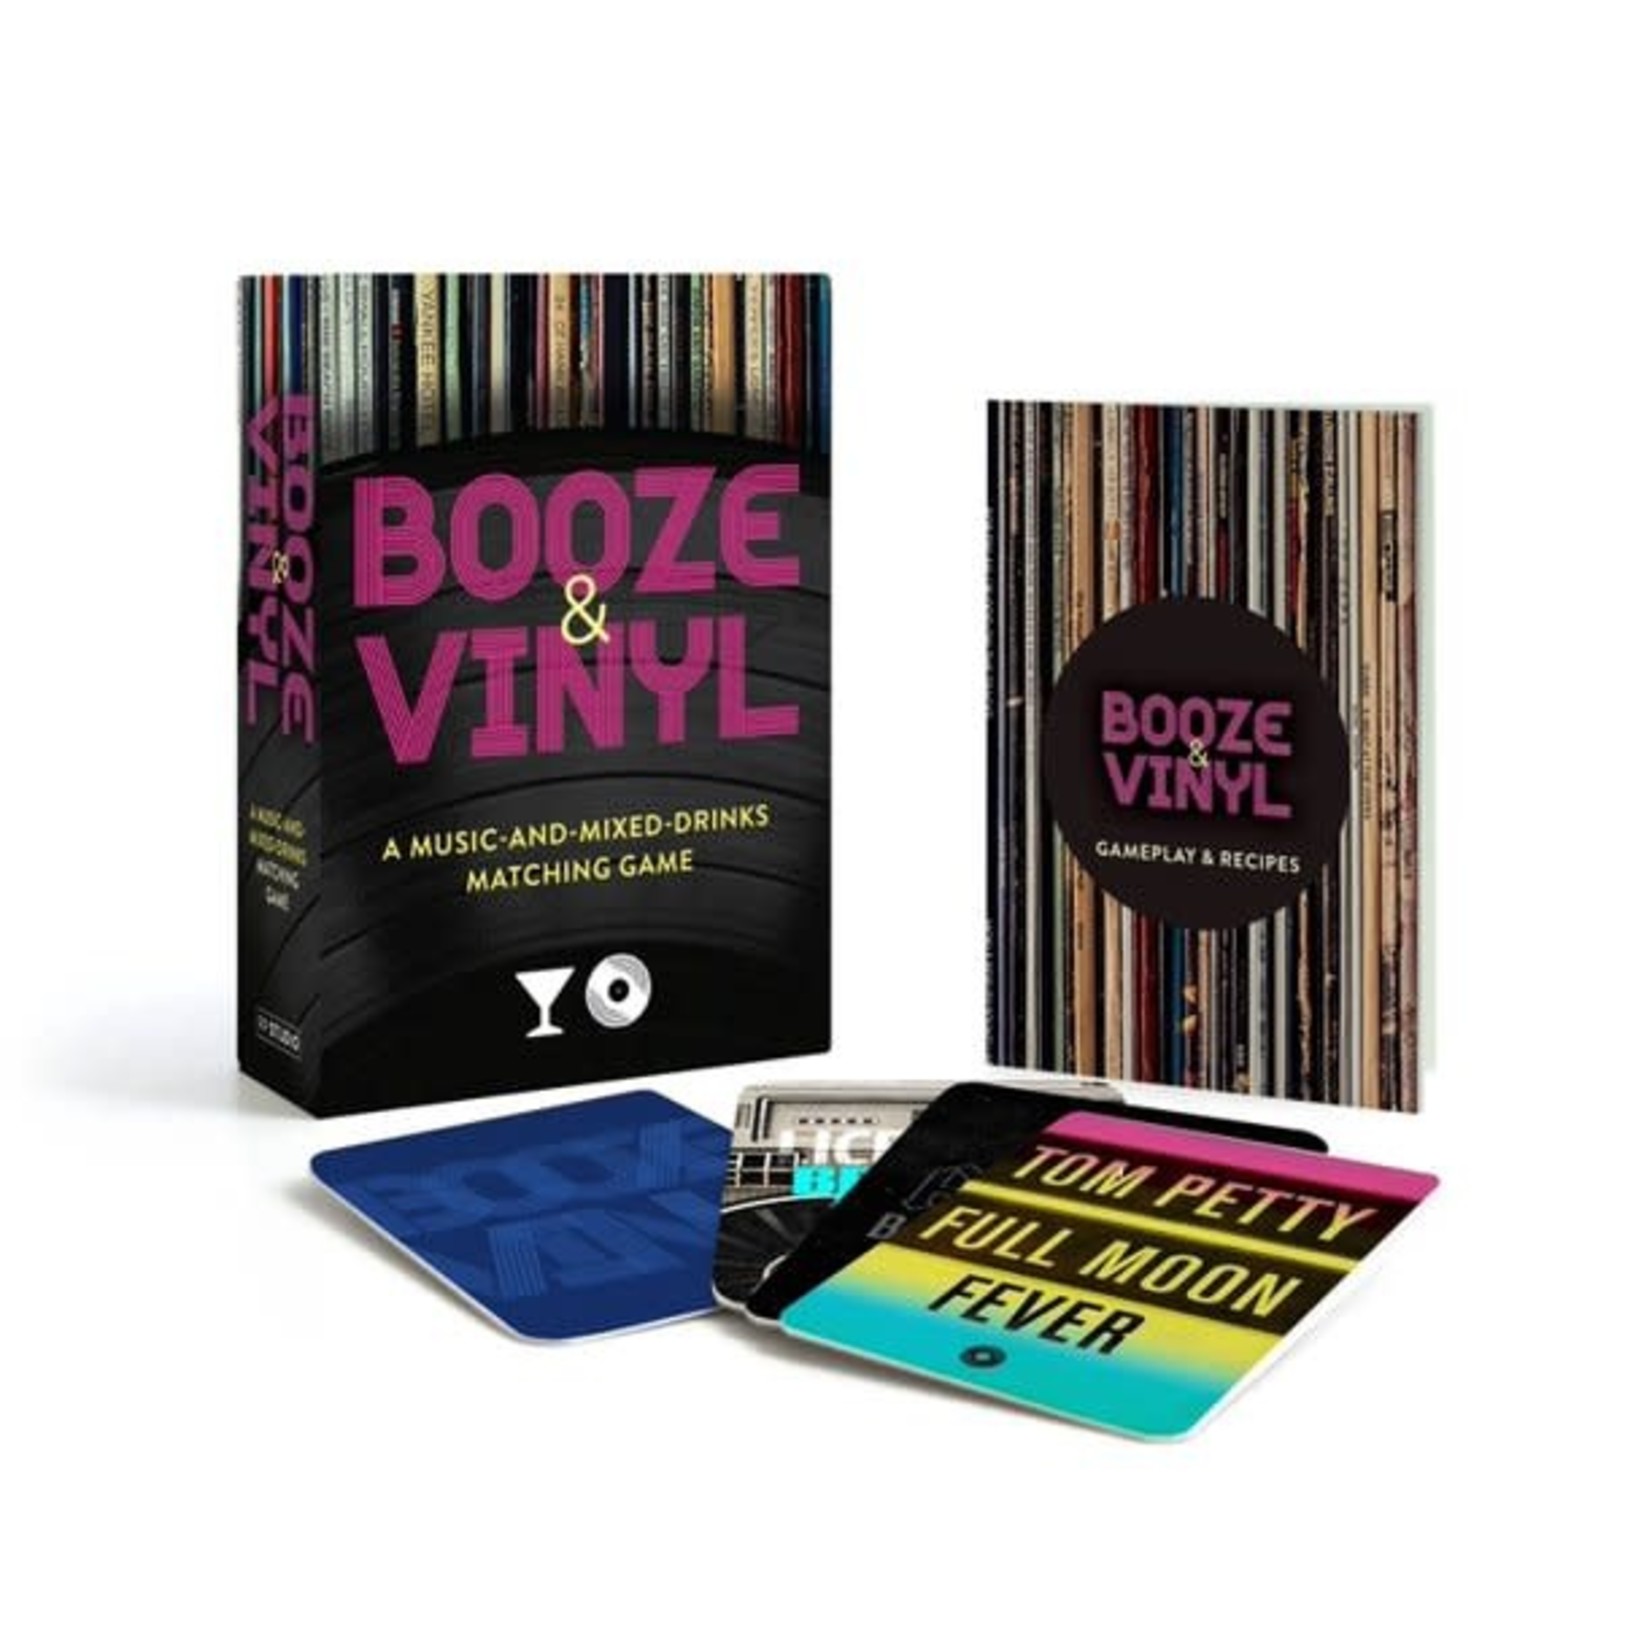 Booze and Vinyl: A Music and Mixed Drinks Matching Game